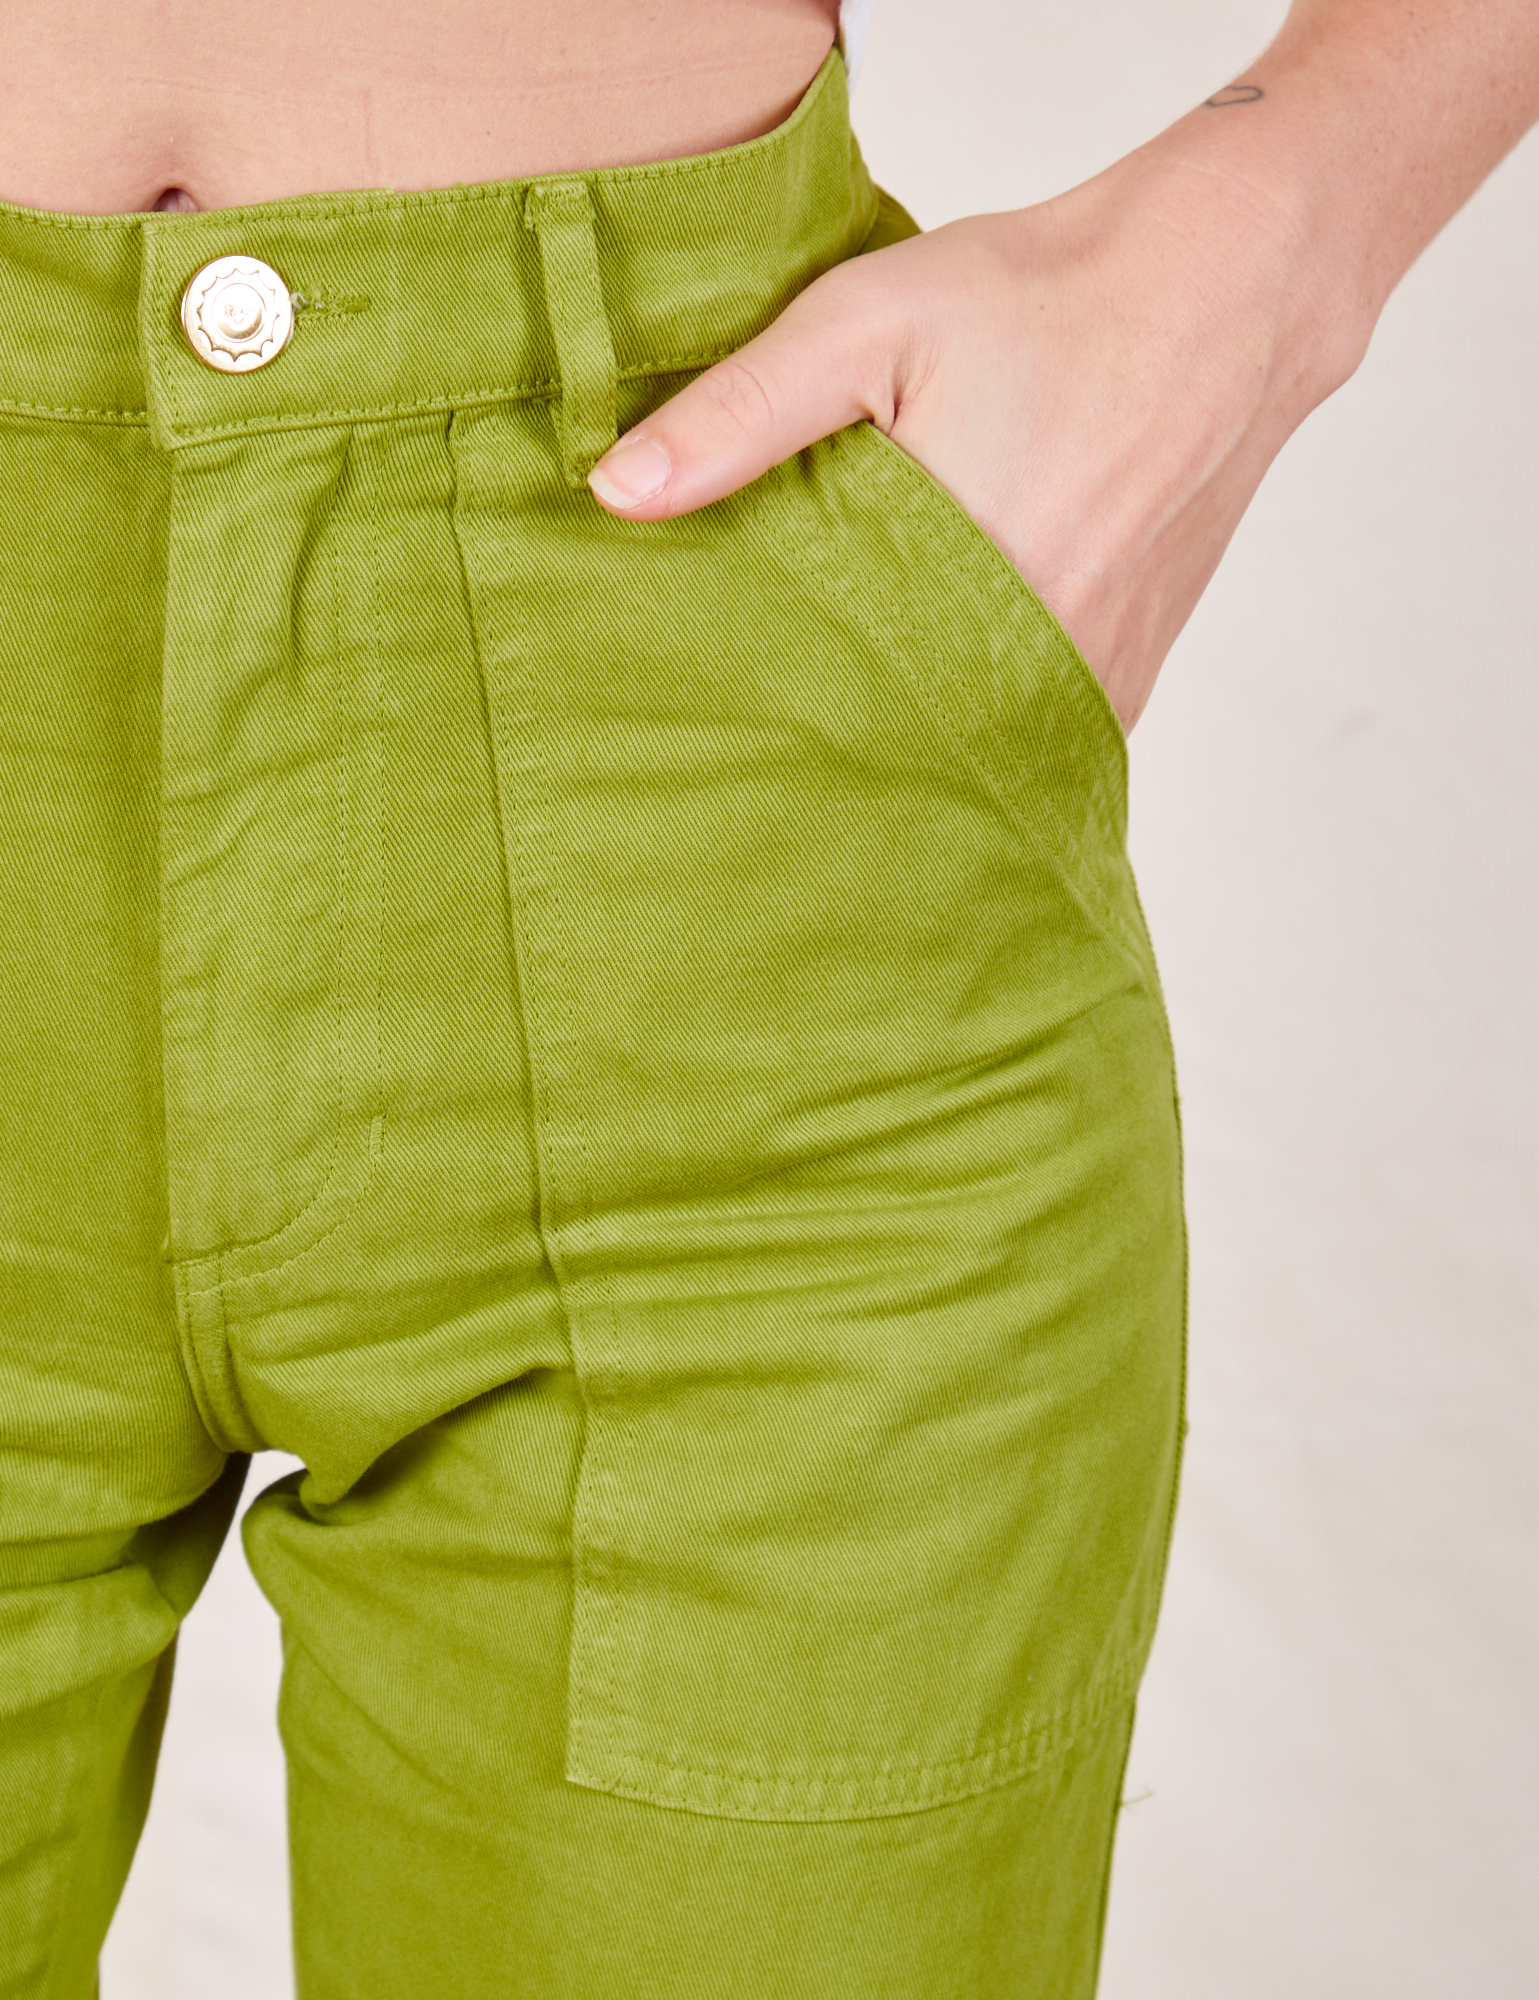 Work Pants in Gross Green front pocket close up. Alex has her hand in the pocket.